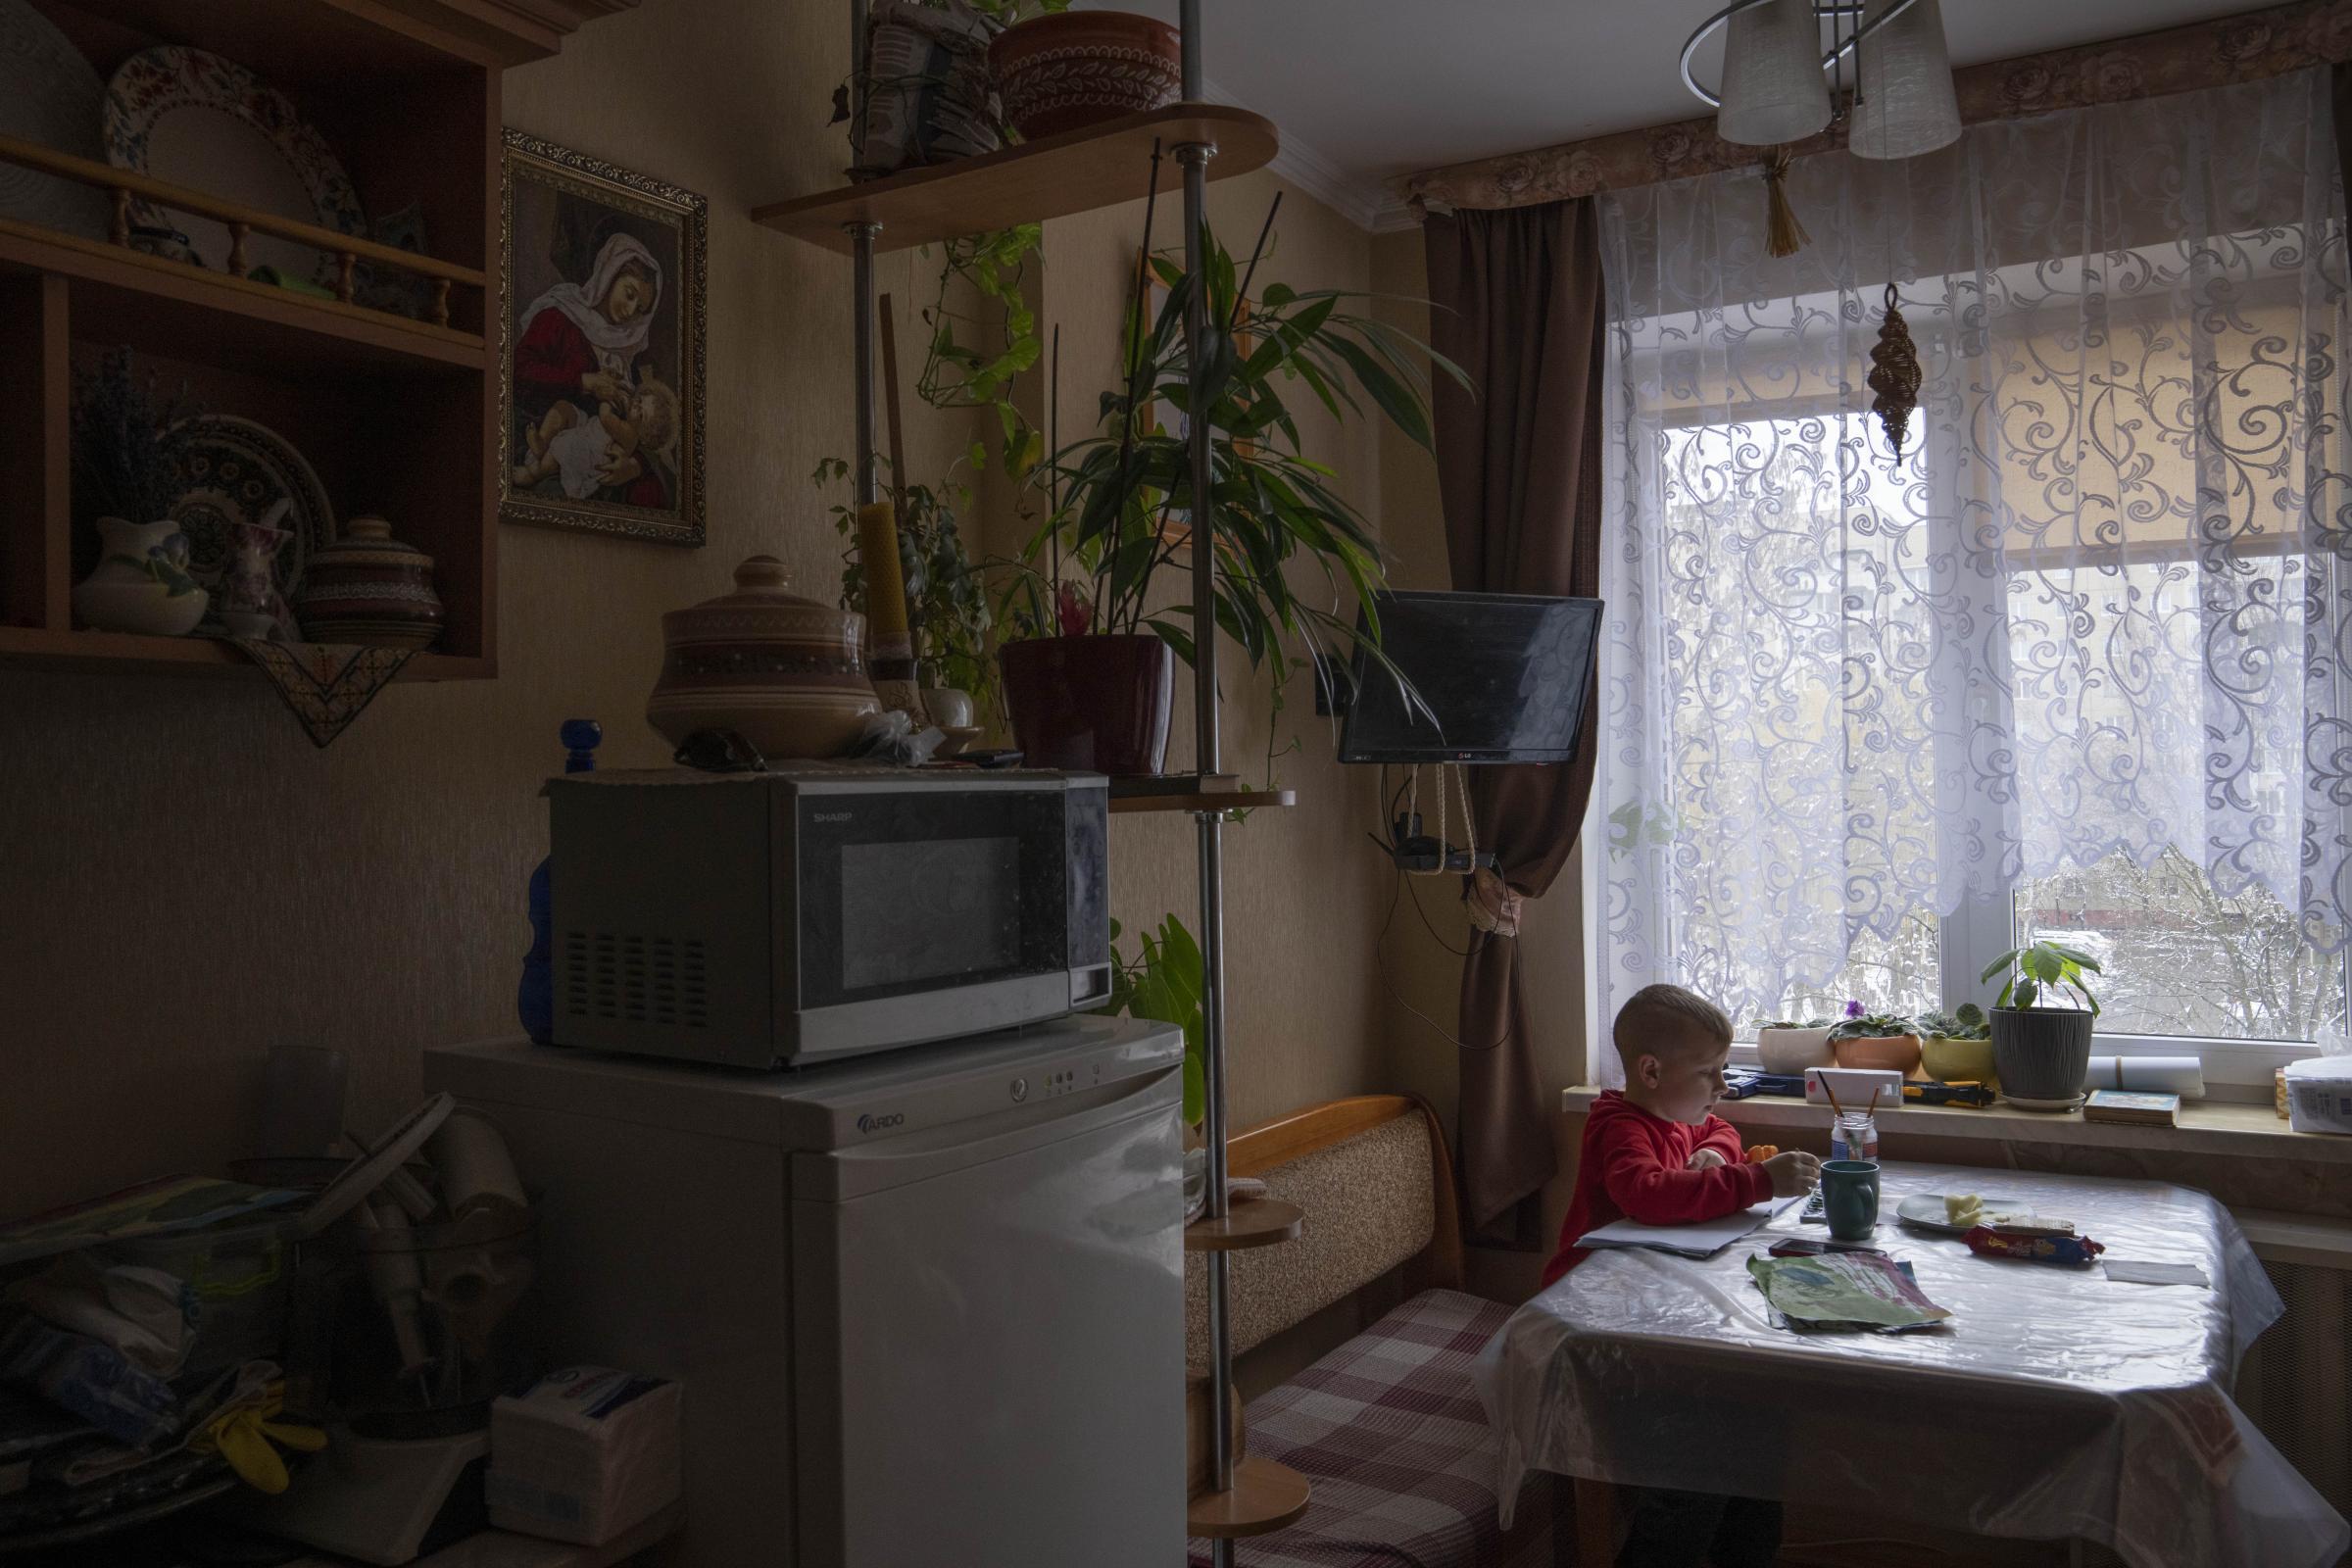 Nazar, paints in the kitchen of an apartment given to his family by a cousin after they fled their home in Kyiv.